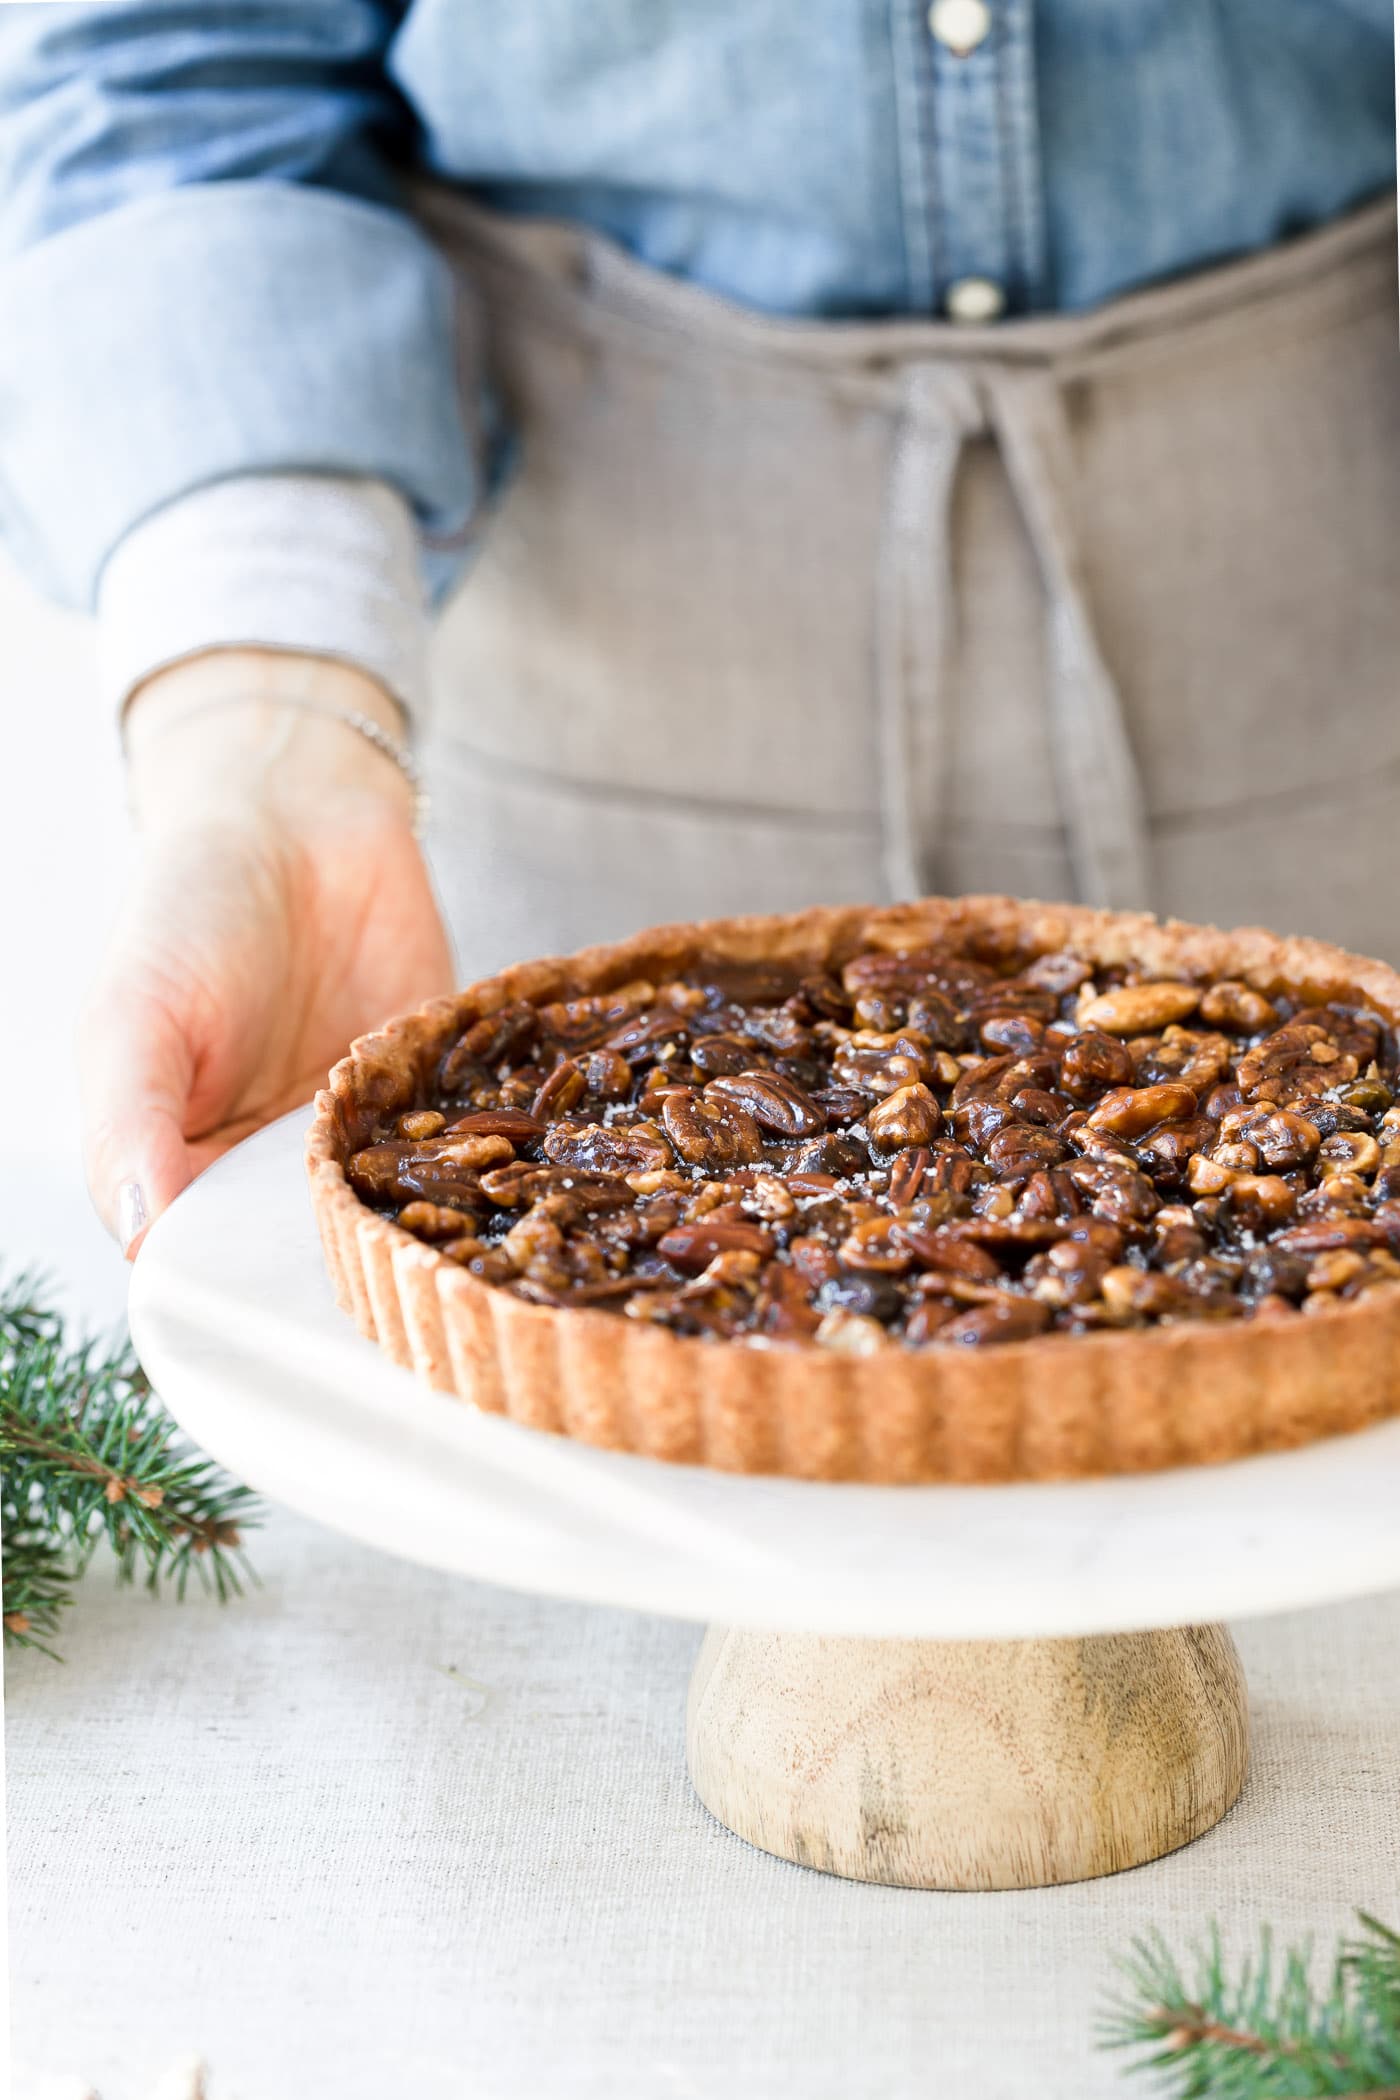 A woman is about to serve a naturally sweetened caramel nut tart.